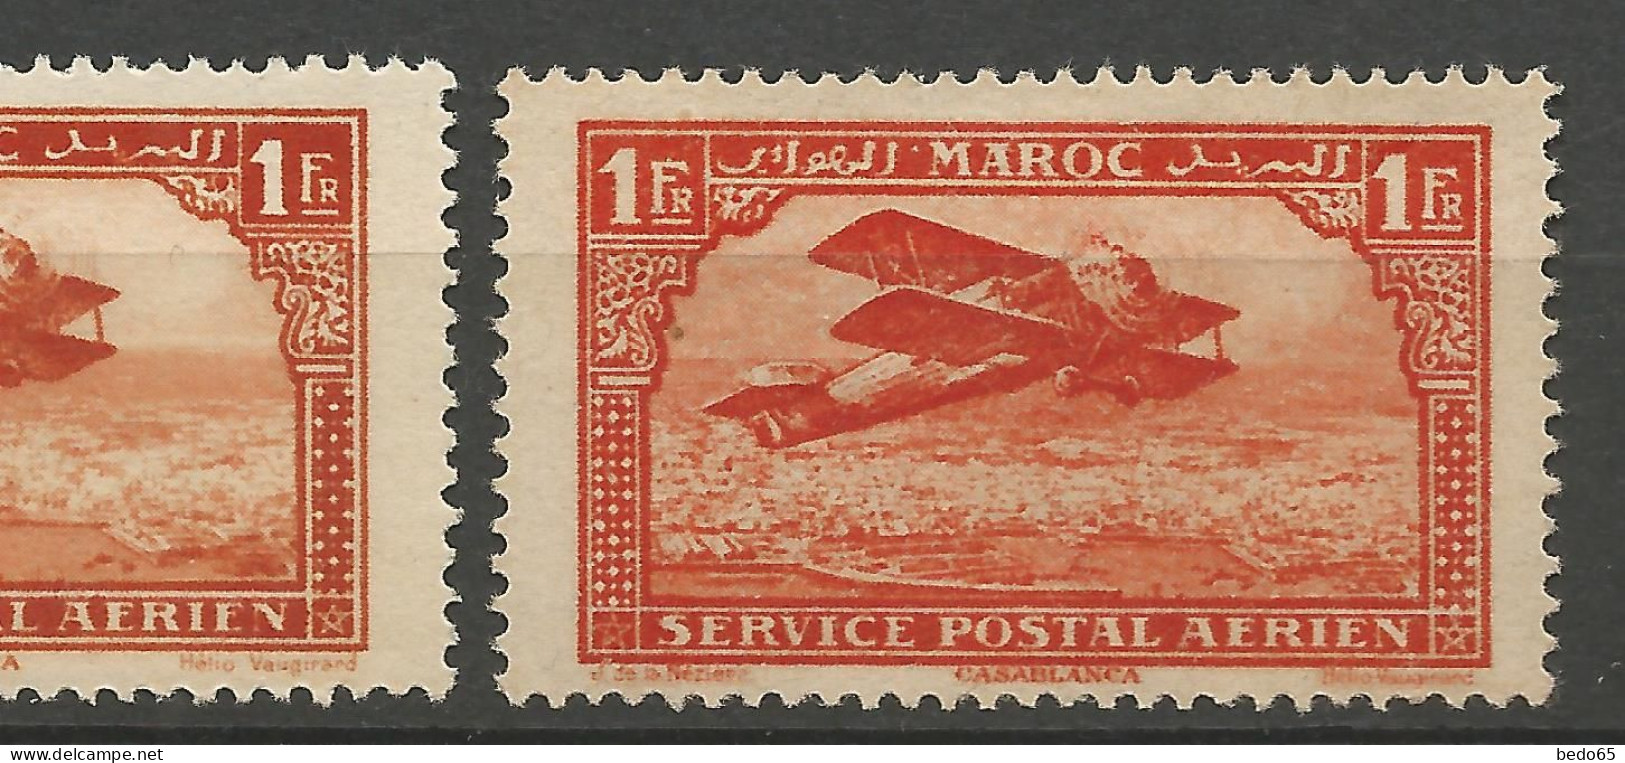 MAROC PA N° 7a Type L NEUF* TRACE DE  CHARNIERE   / Hinge / MH - Luchtpost